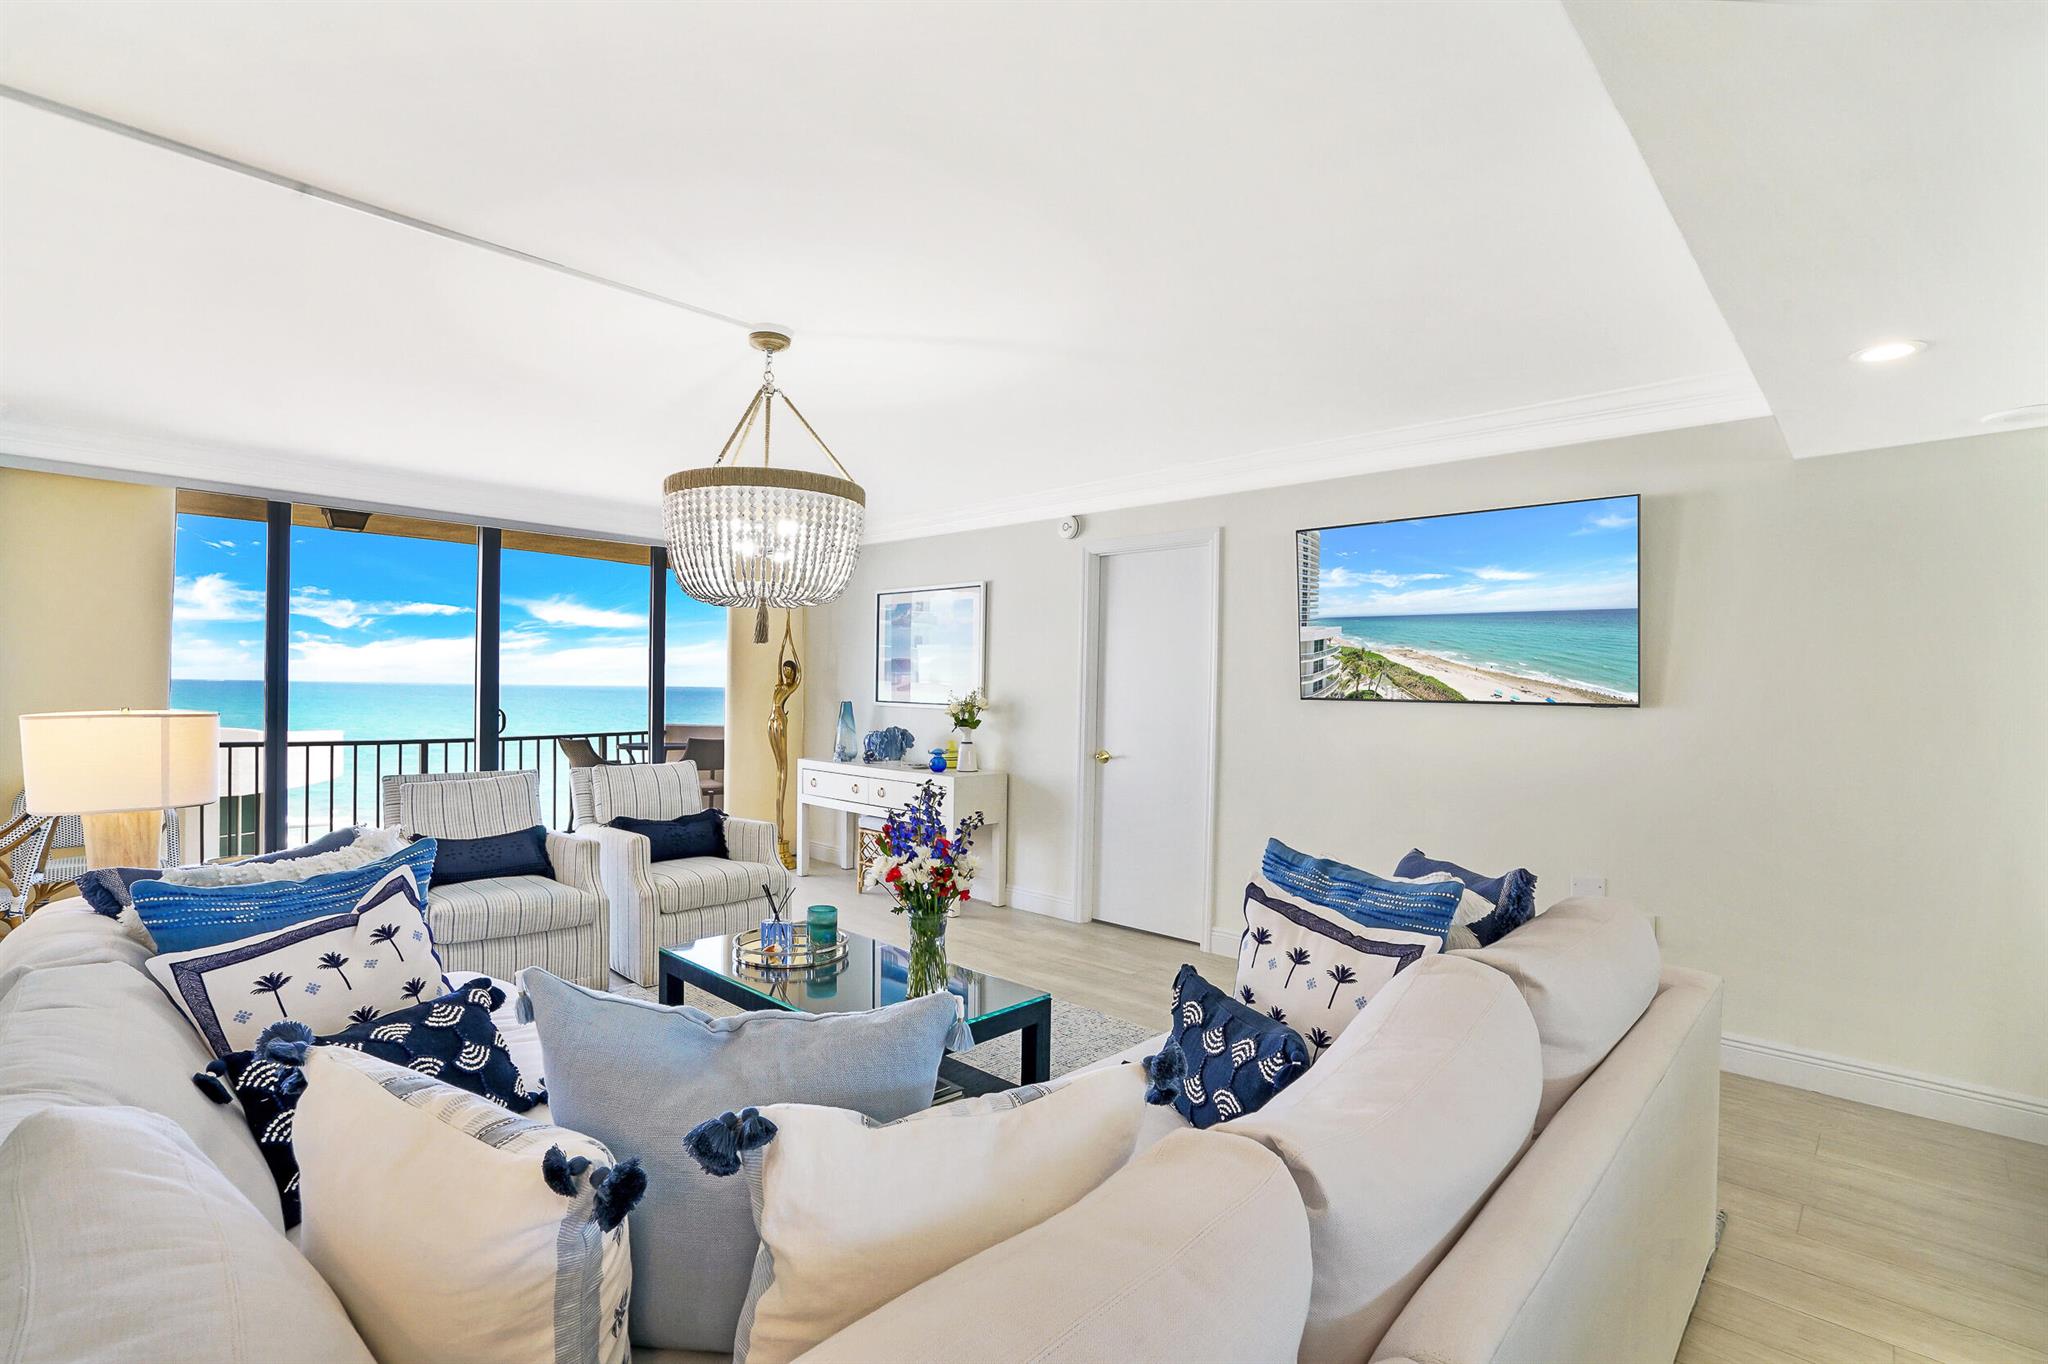 This breathtaking Oceanfront Condo was completely renovated in late 2021. One of the many upgrades is the newly designed master suite which allows for a large walk-in closet with built-in shelves/drawers and one of a kind lighted makeup vanity. The Master bathroom was also redesigned to include a custom linen closet, large shower and a custom vanity with dual sinks. The owners spared no expense redoing the kitchen which includes custom cabinets, brass fixtures, SS appliances, wine cooler & gorgeous quartz countertops. Other notable features include a separate laundry room, custom pantry, new flooring, a large walk-in closet in the guest room and a new HVAC (late 2021). See supplemental...